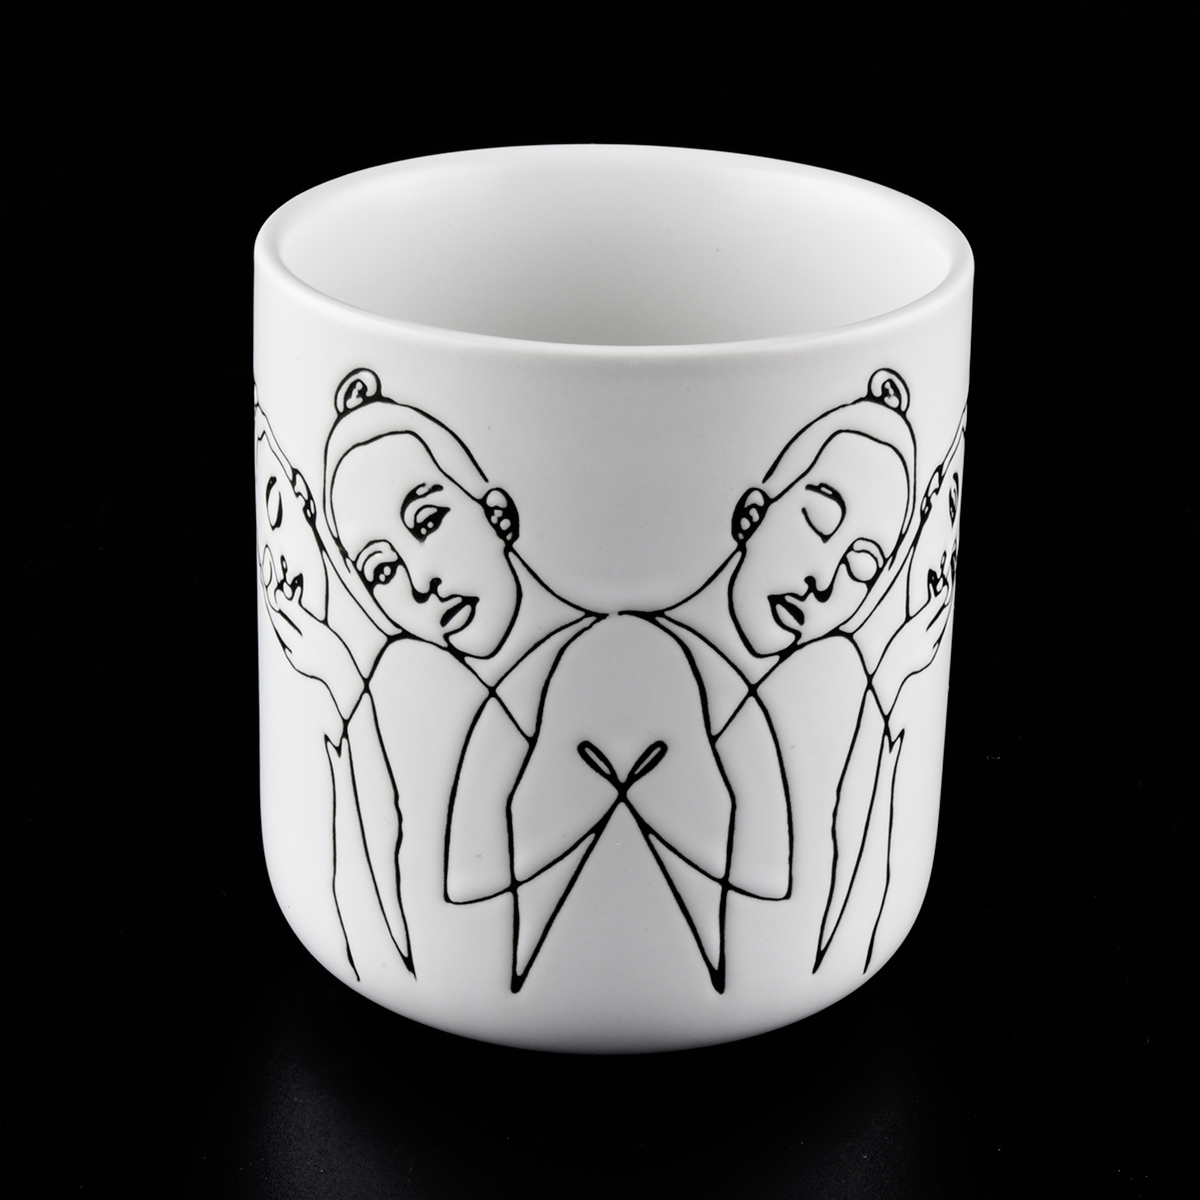 Matte white ceramic candle jars with sketch artwork